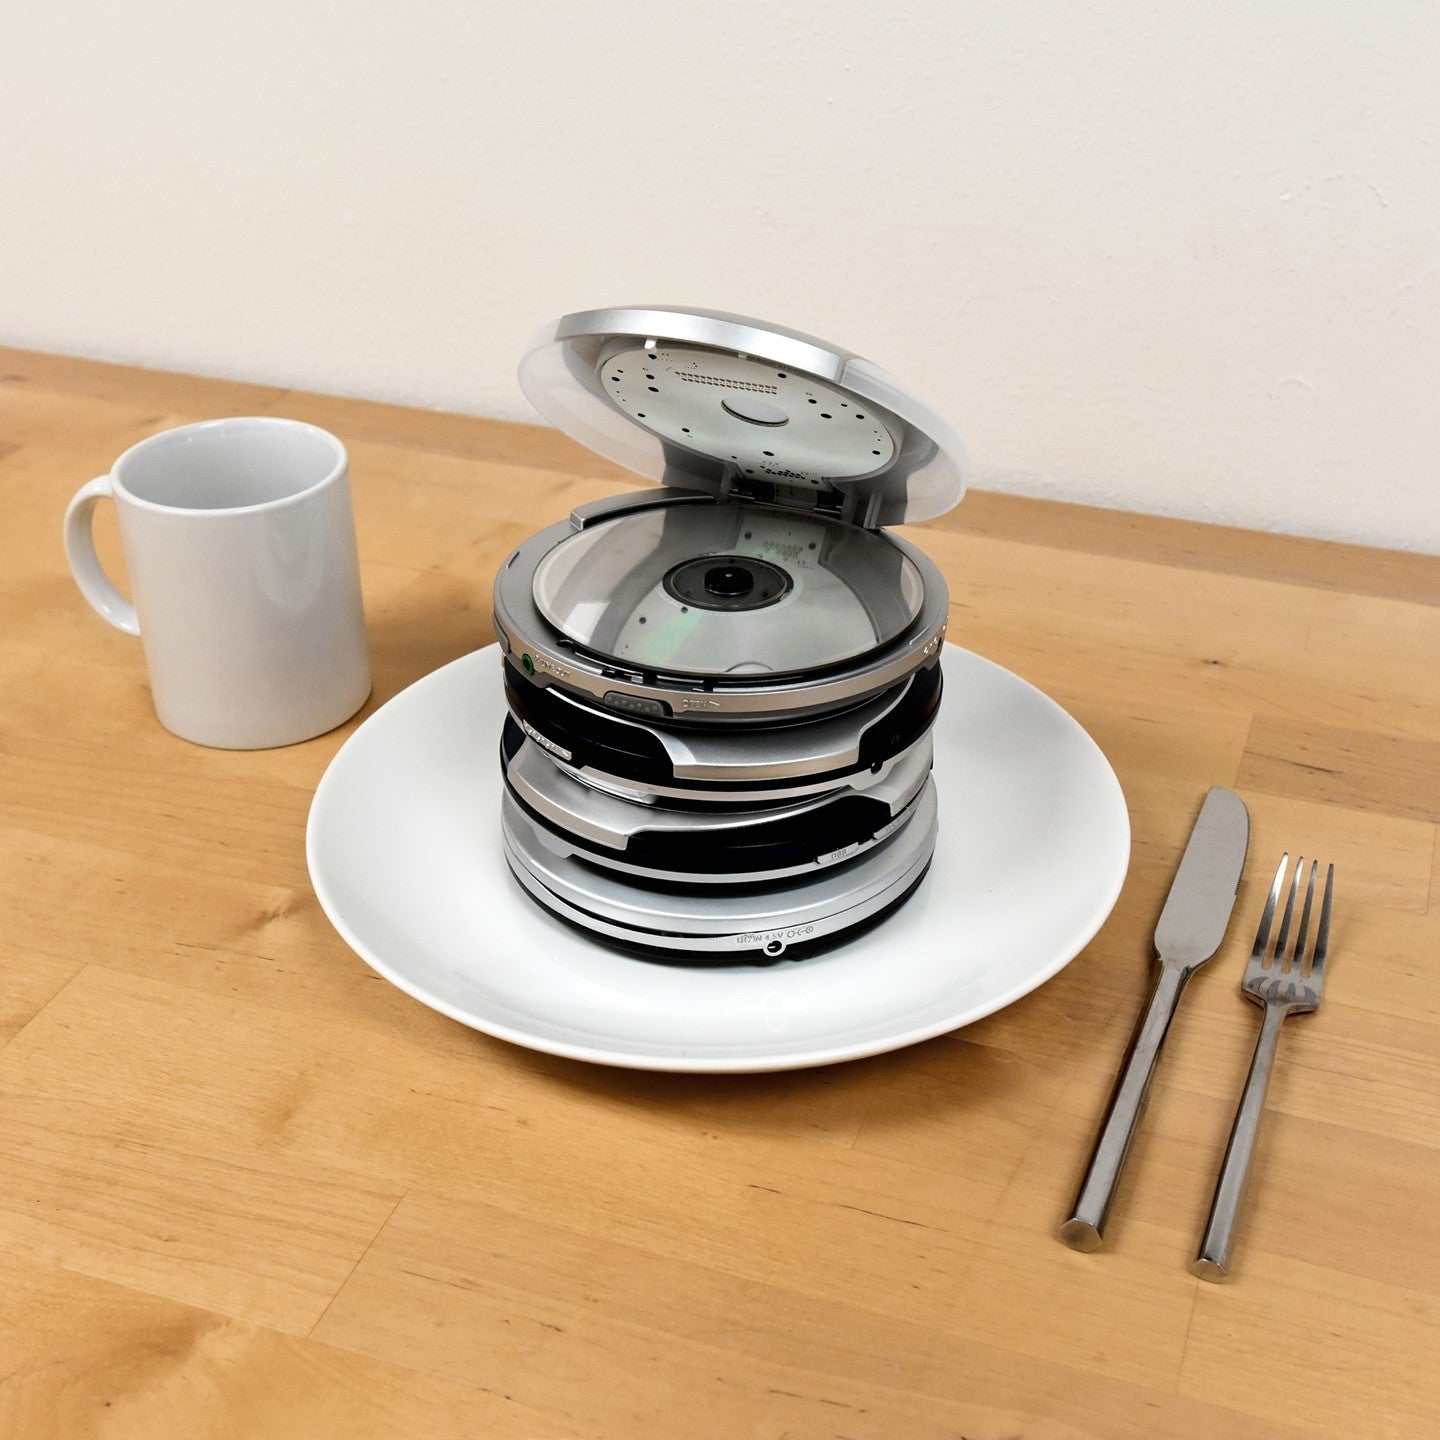 stack of cd players on a plate